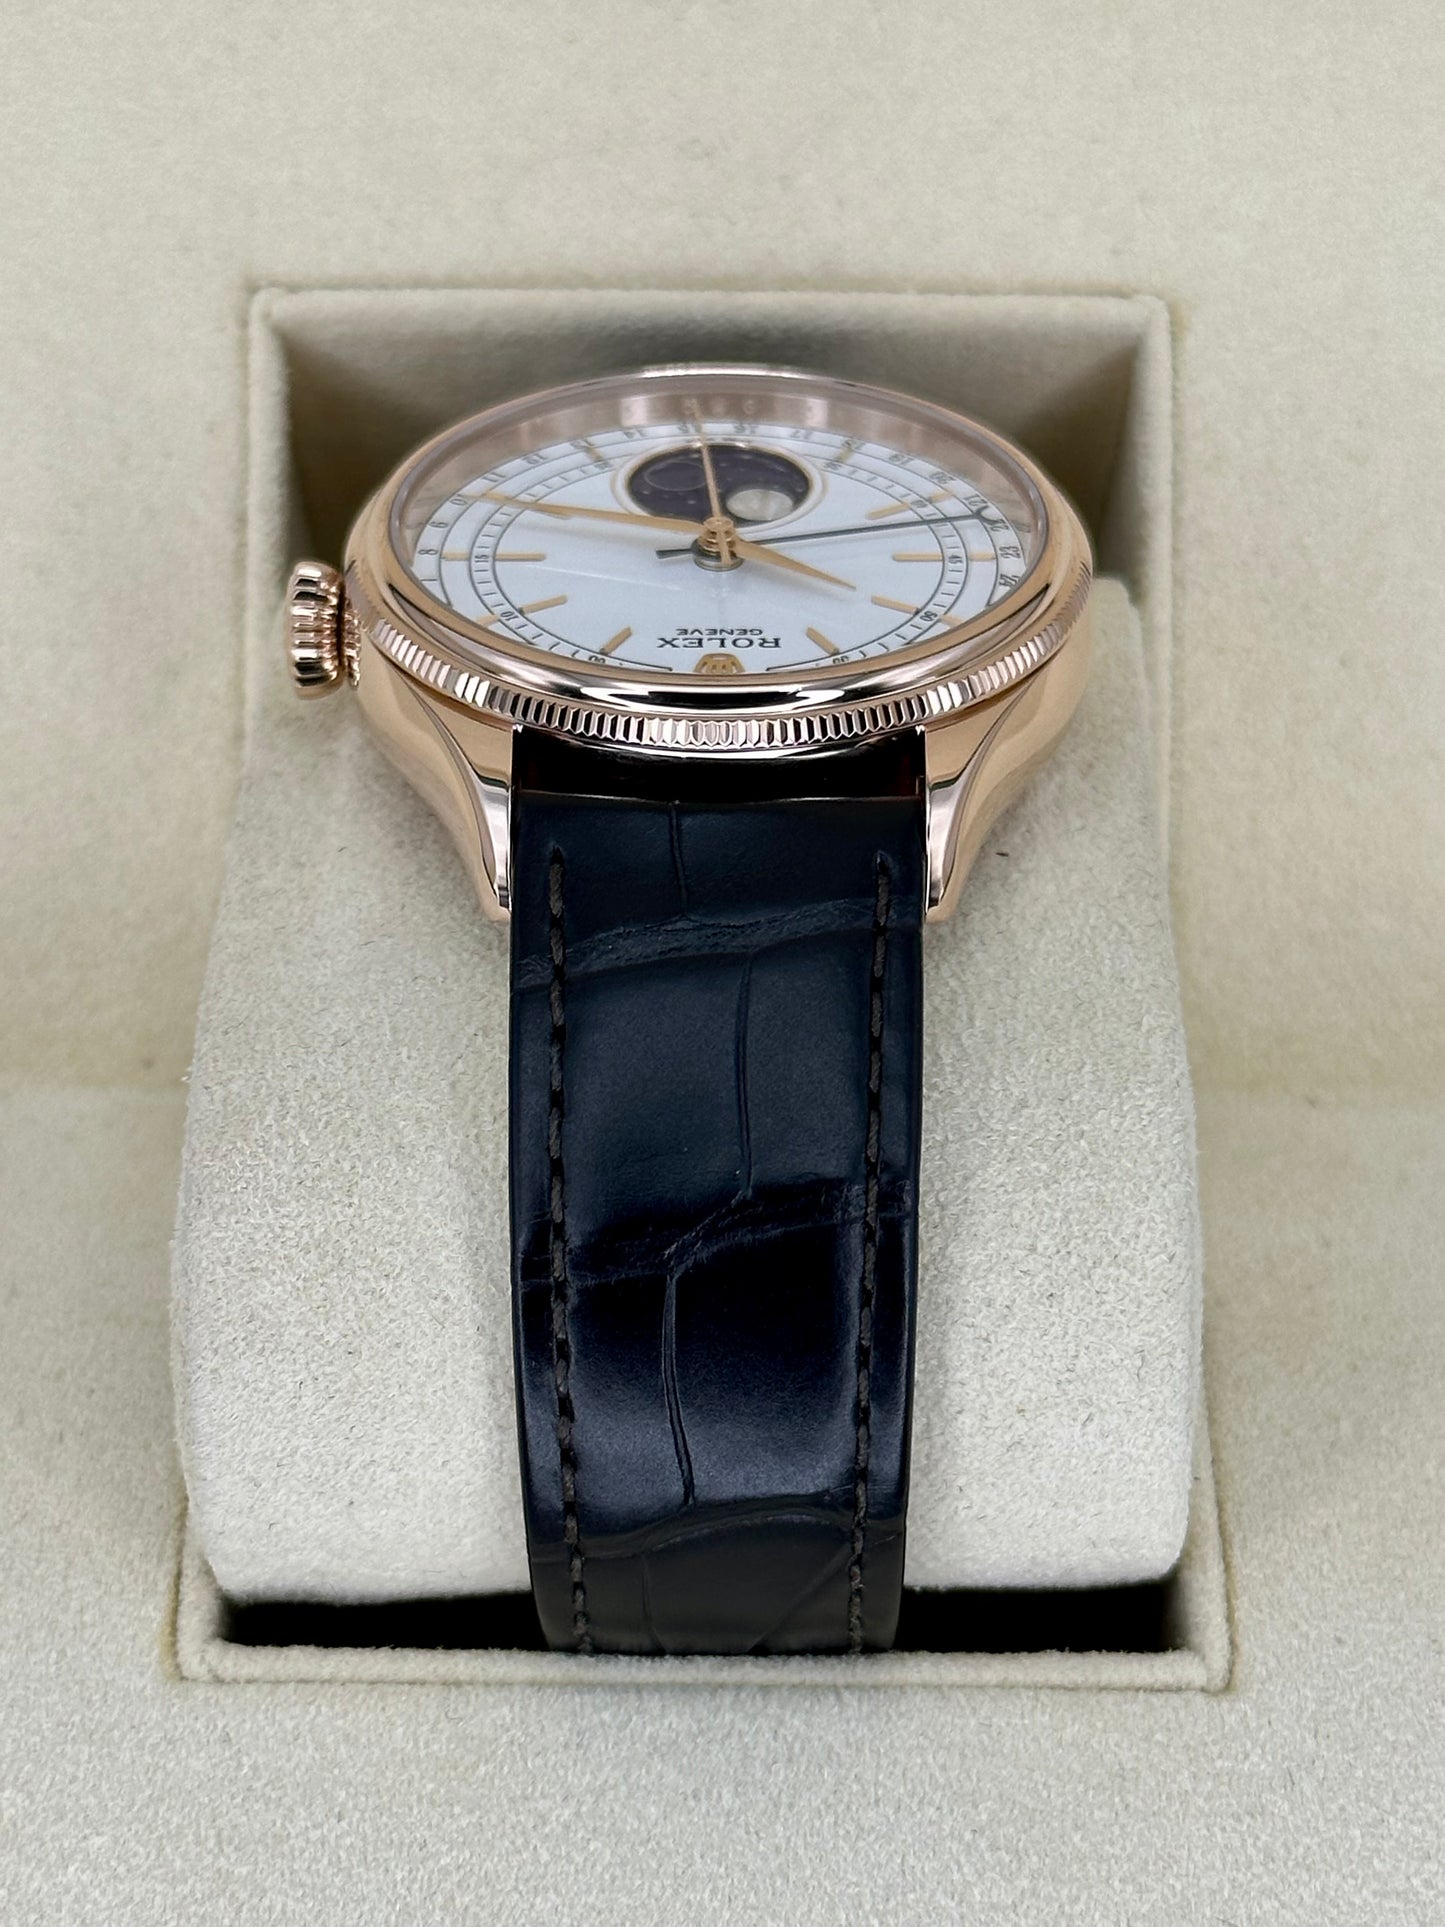 2022 Rolex Cellini Moonphase 39mm 50535 Rose Gold White Dial - MyWatchLLC